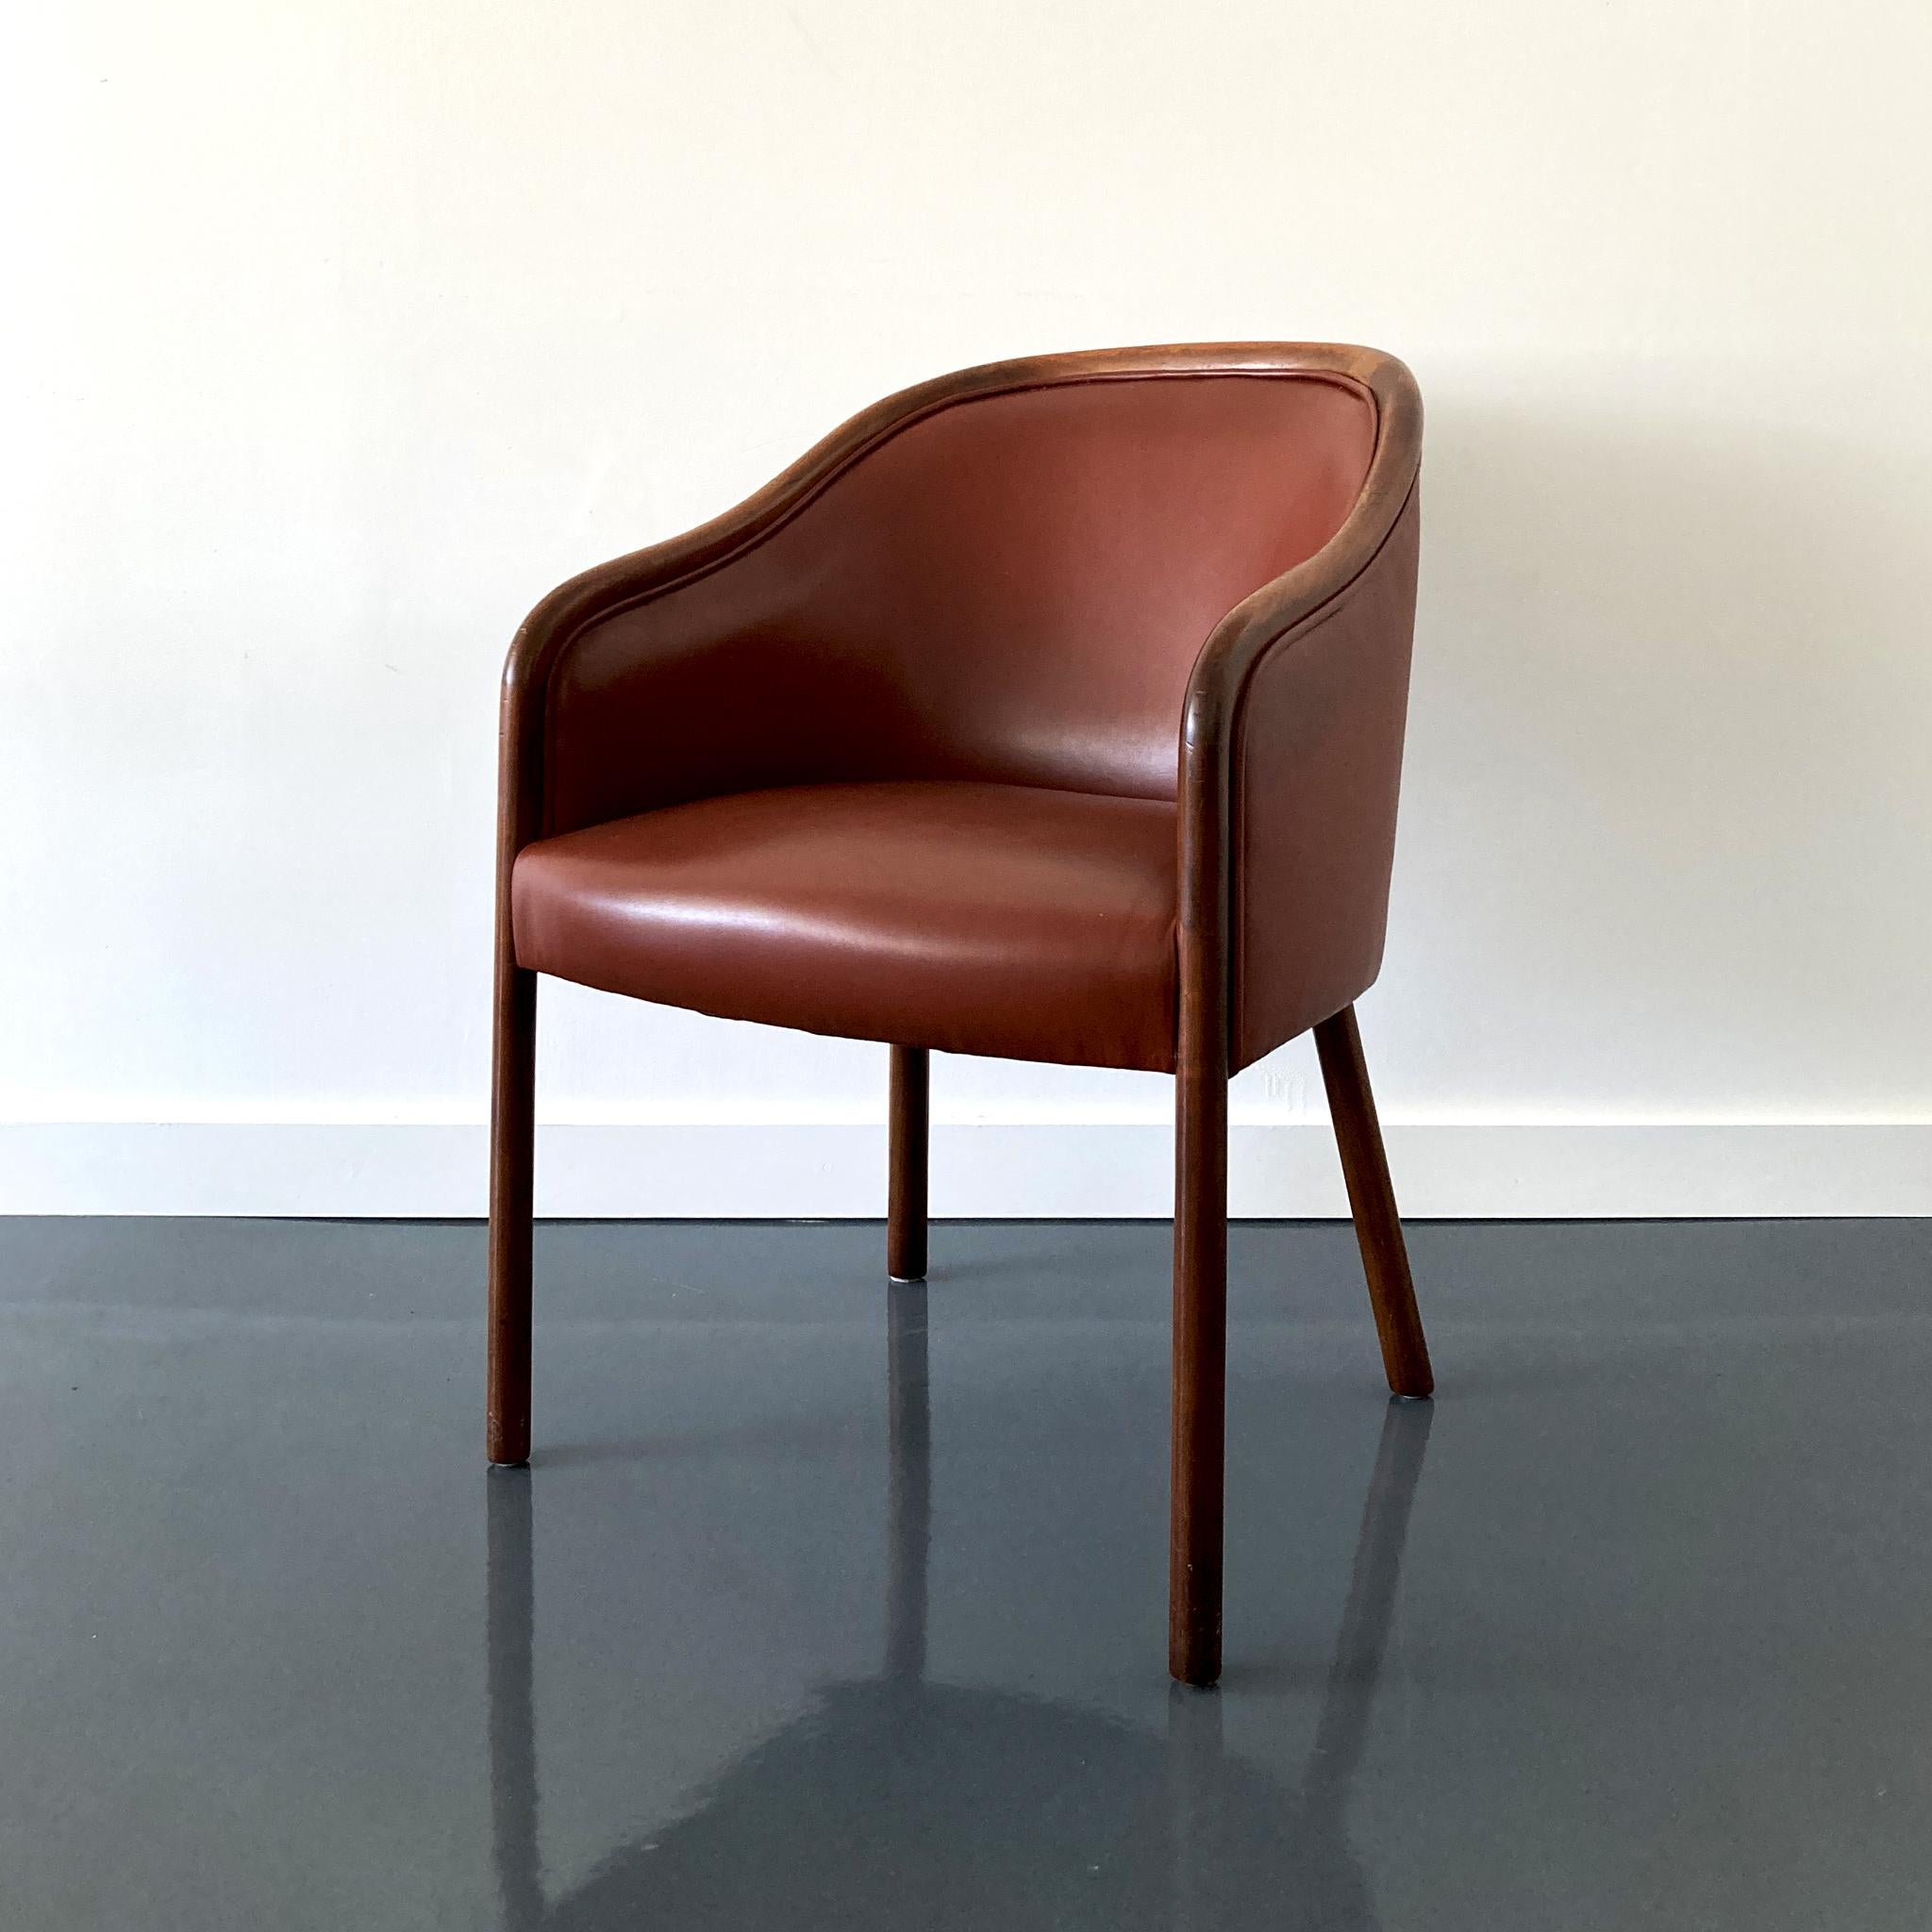 Ward Bennett Brickel Associates Ash & Burgundy Leather Chairs, Set of Four In Good Condition For Sale In New York, NY